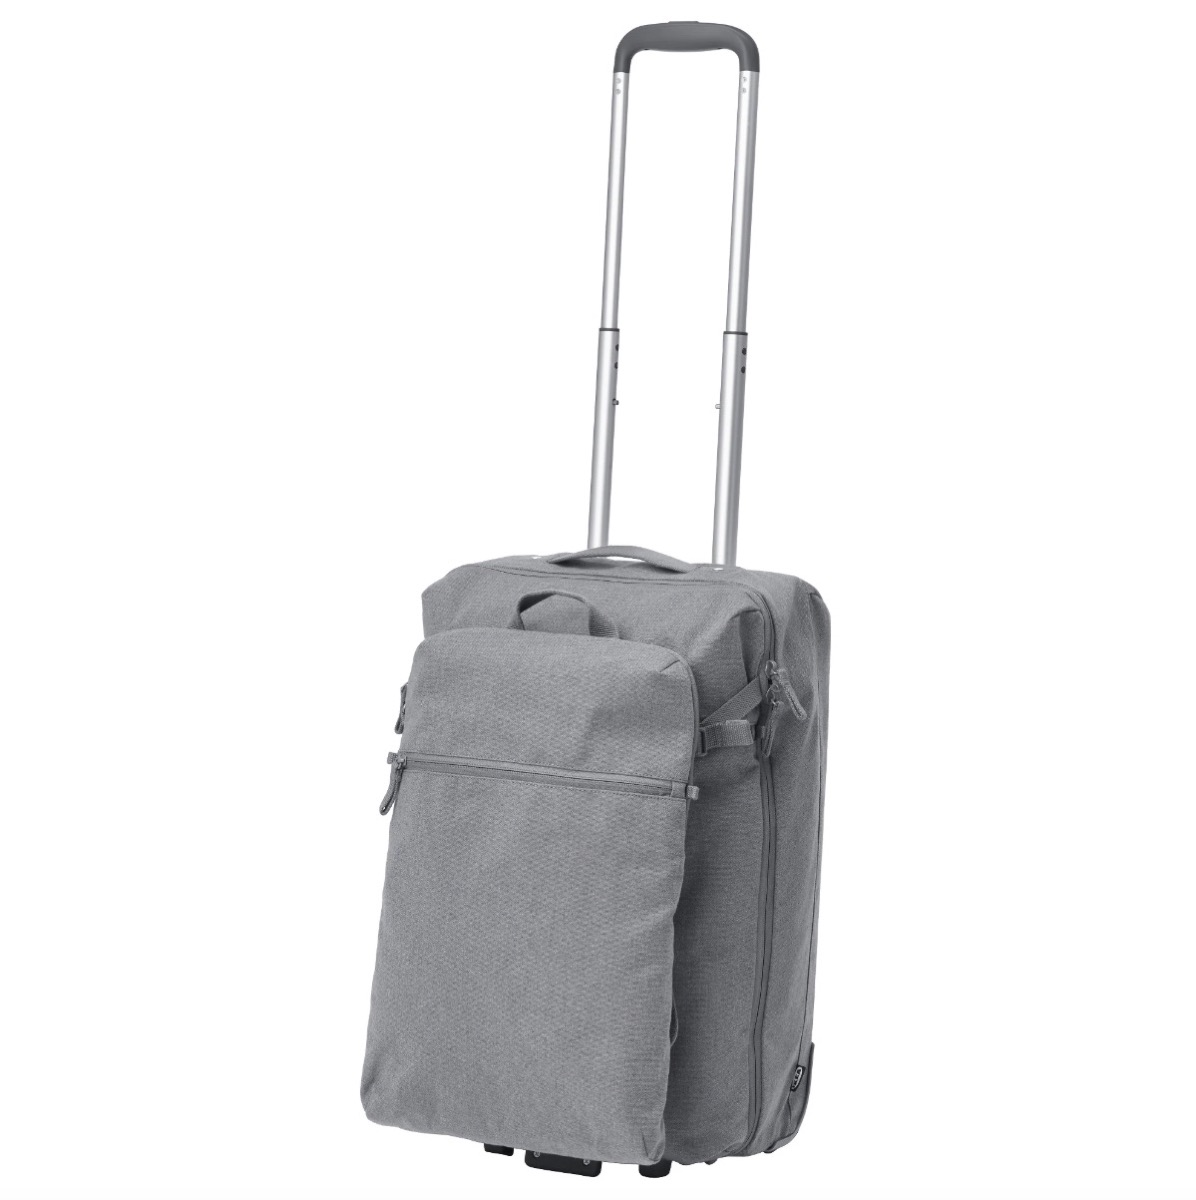 Ikea Carry-On Bag {Never Buy at Ikea}